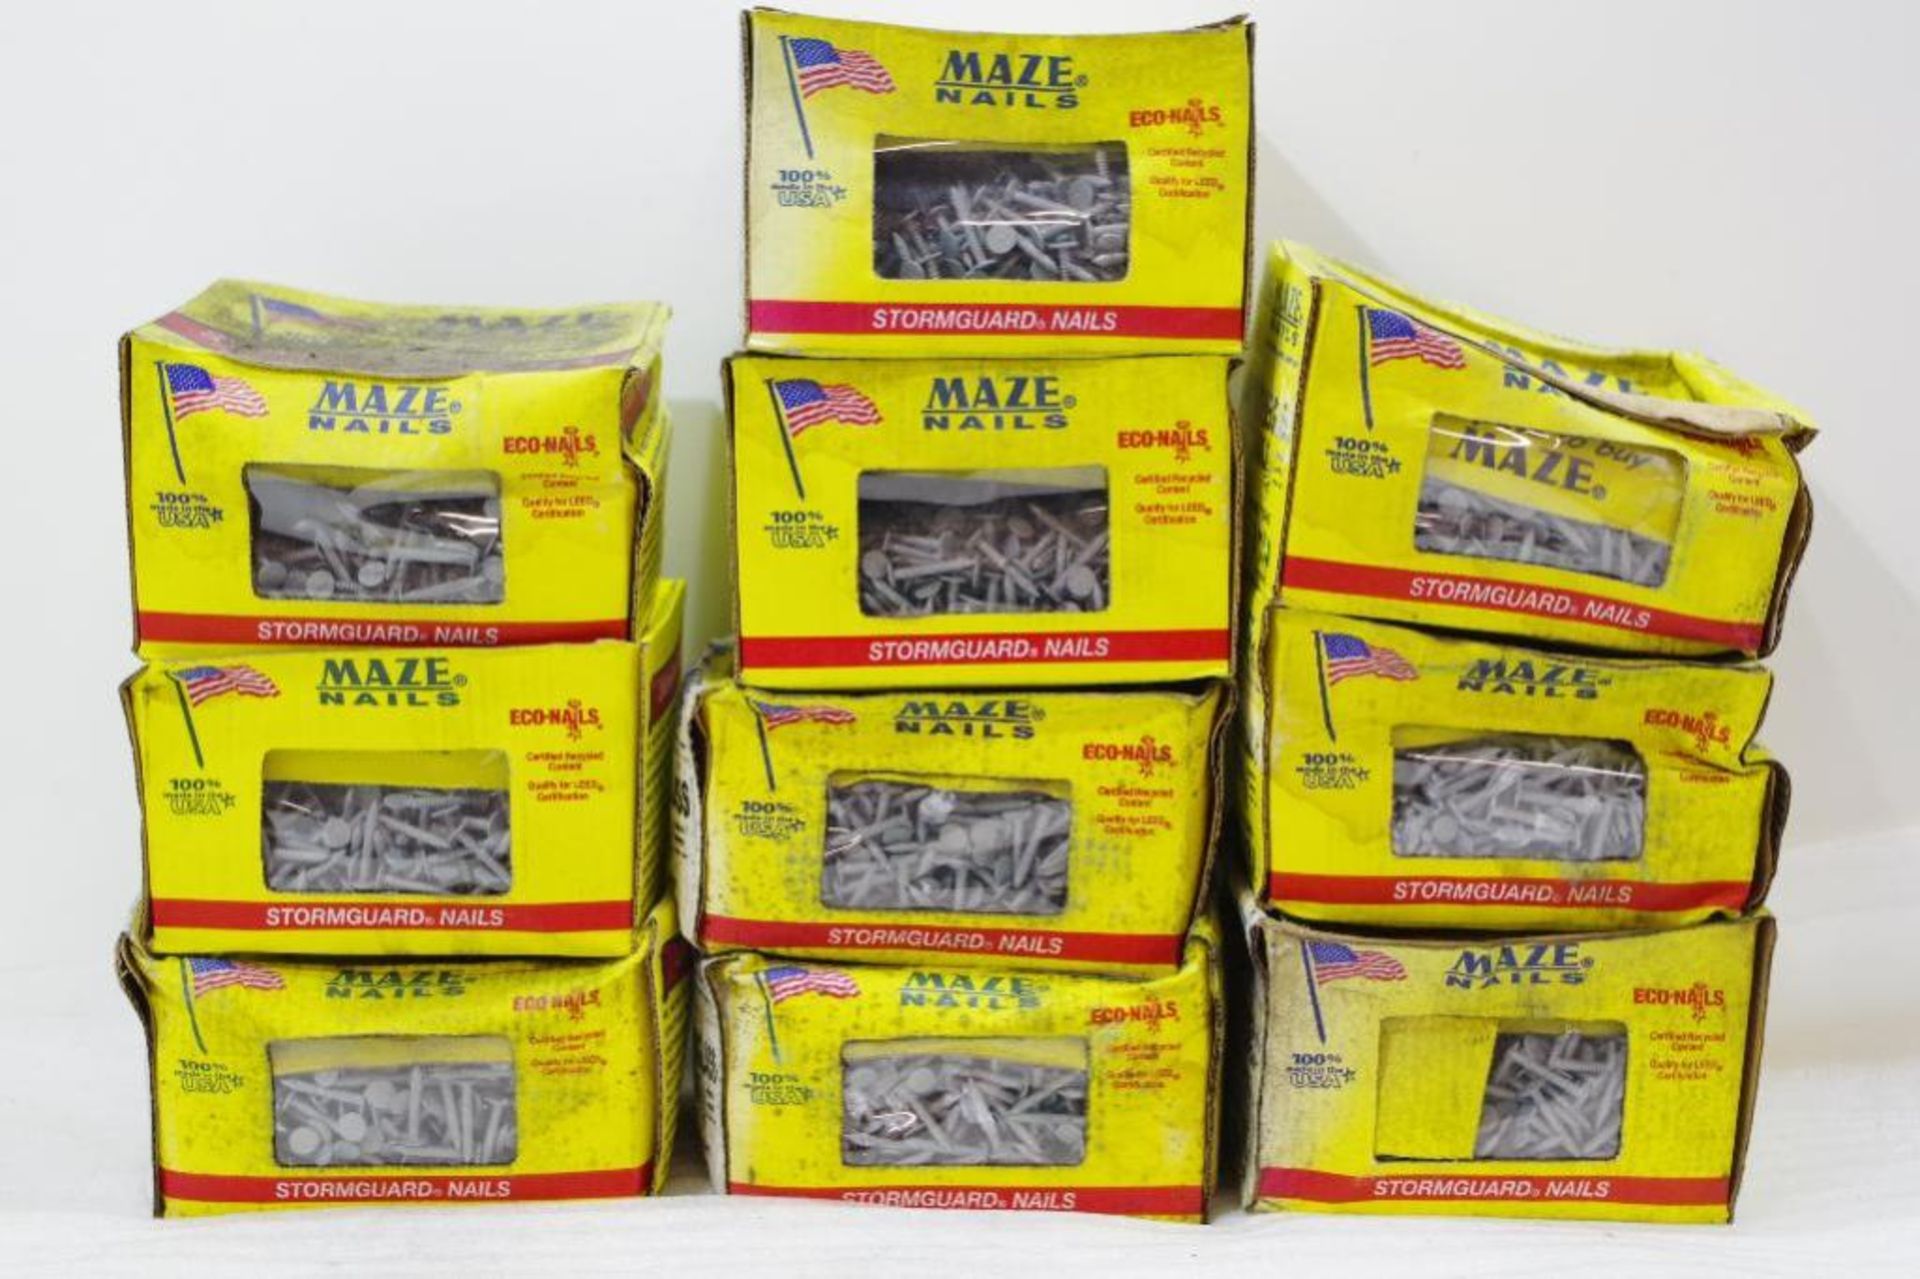 (50) Lbs. MAZE Asphalt and Fiberglass Shingle Nails 1" M/N R-101-A, Made in USA (10 Boxes of 5 Lbs.)